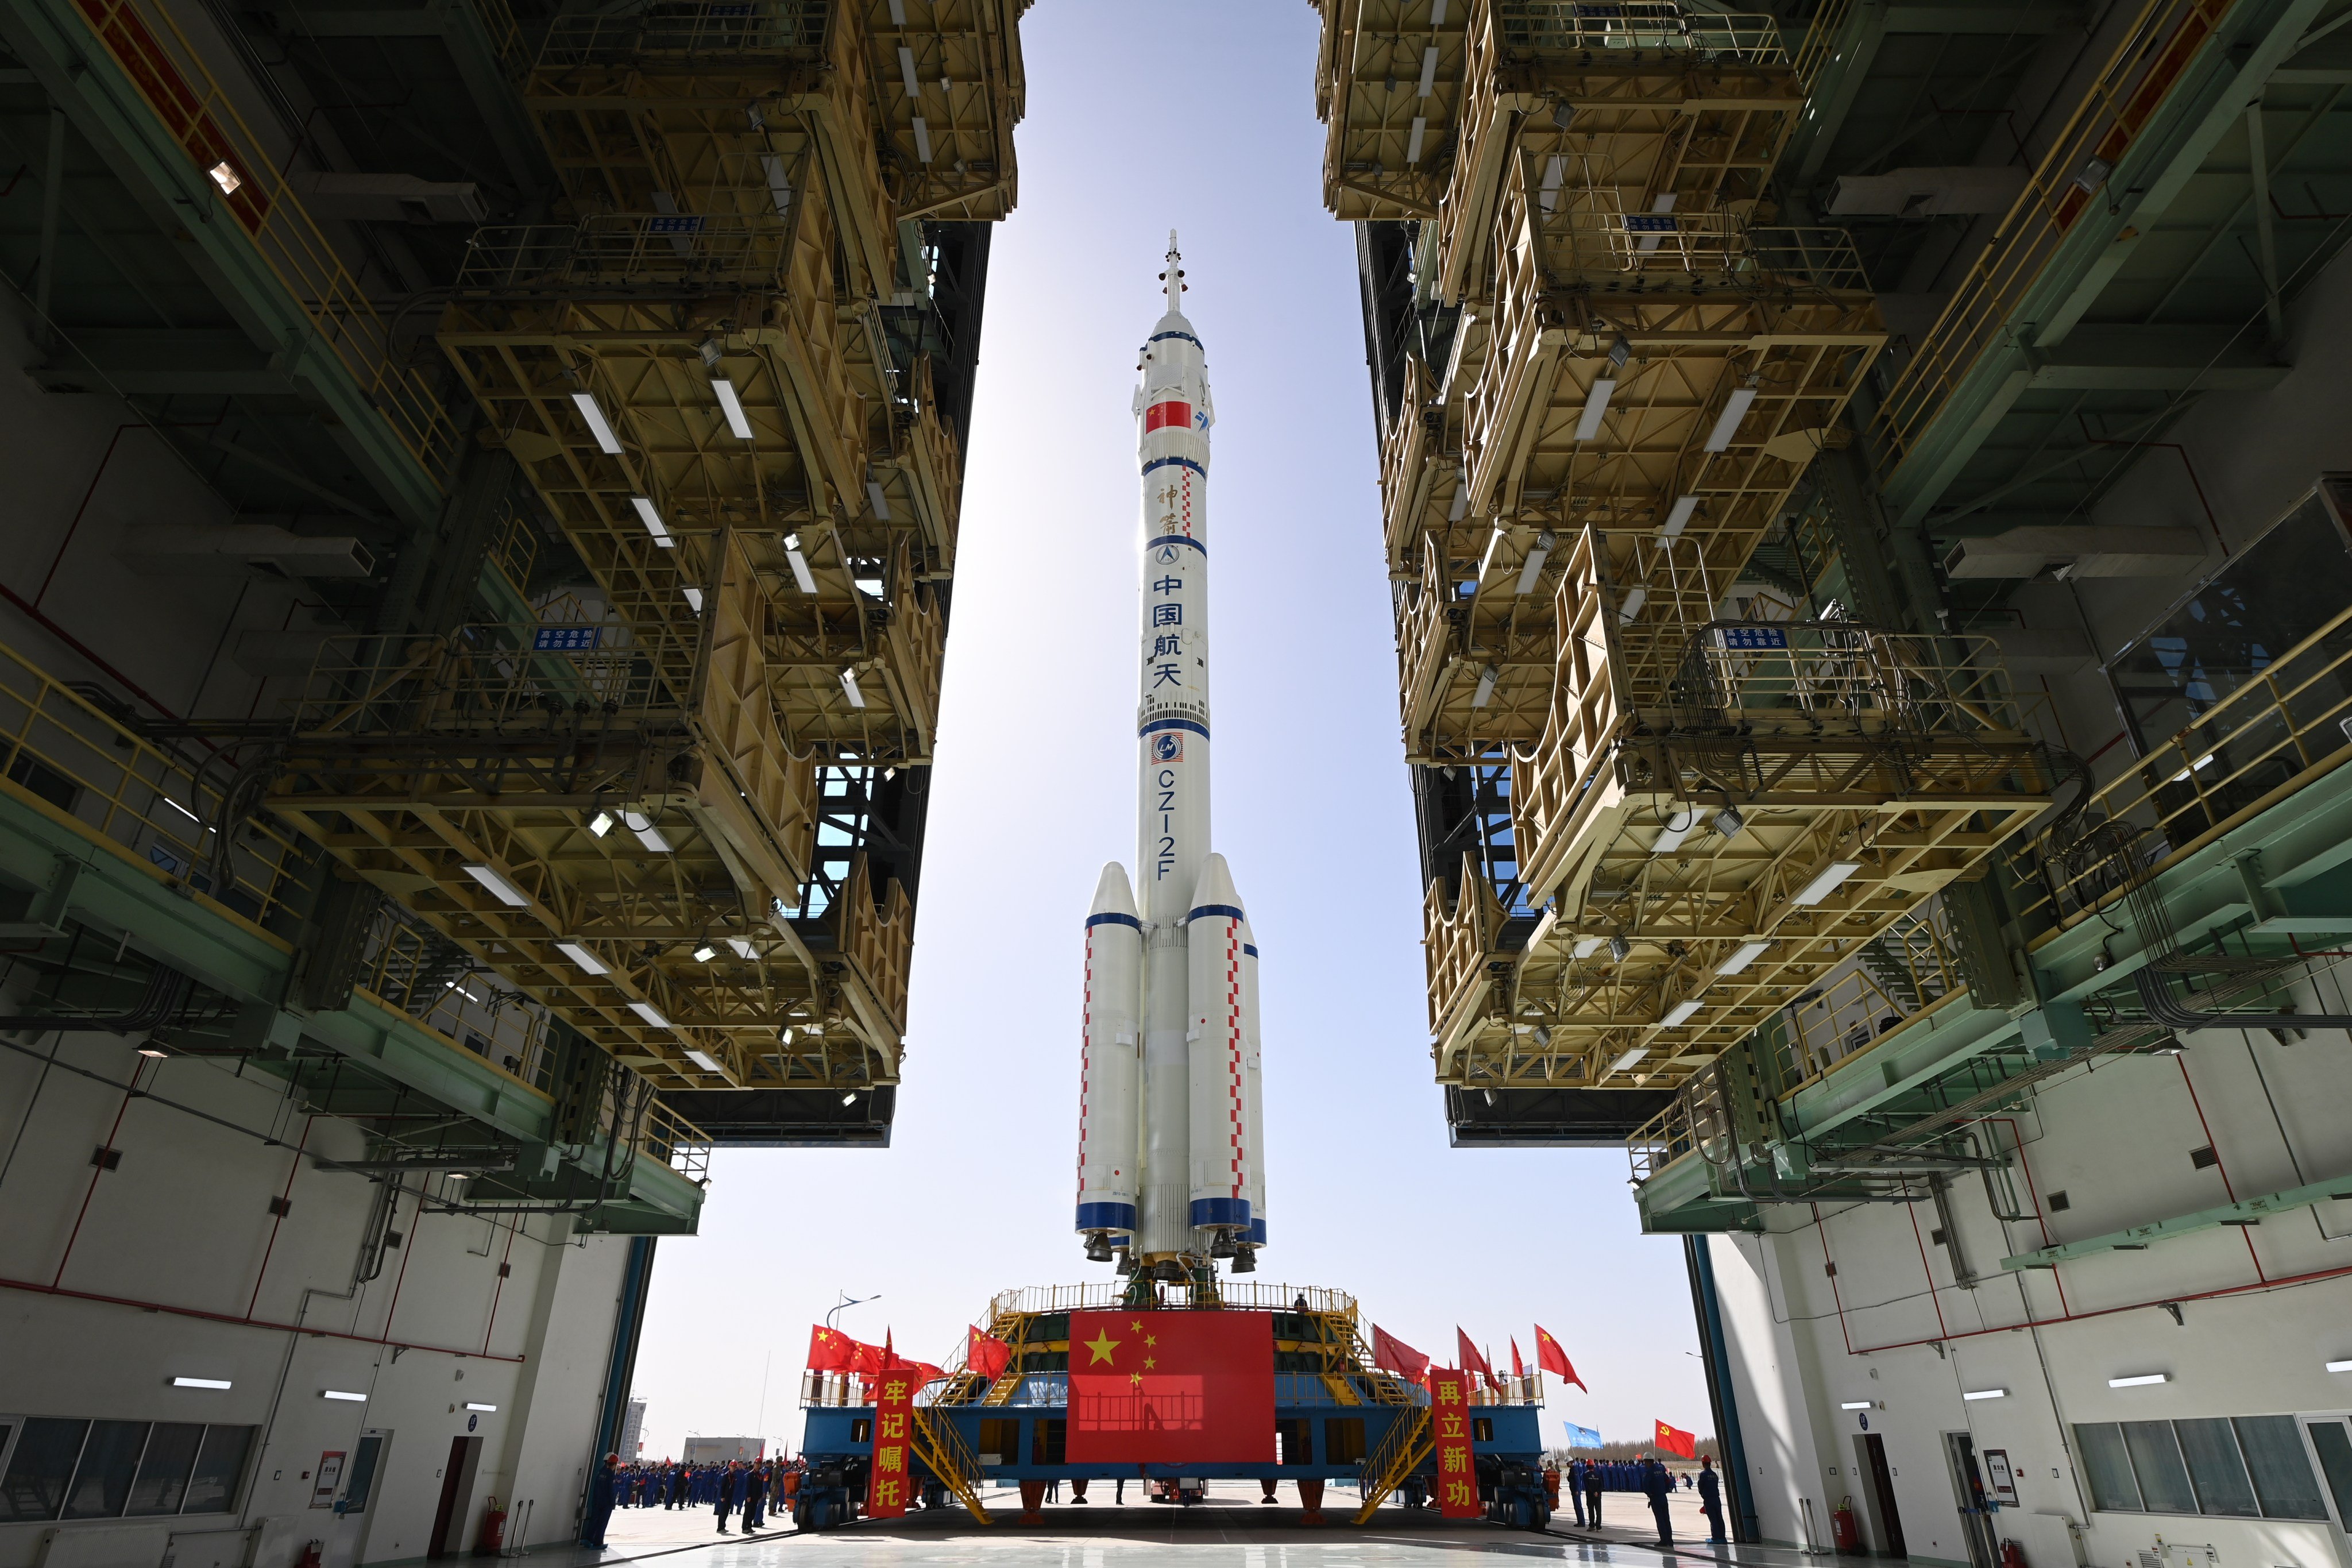 The Shenzhou-18 spaceship and a Long March-2F carrier rocket are pictured at the Jiuquan Satellite Launch Centre in northwest China. Photo: Xinhua